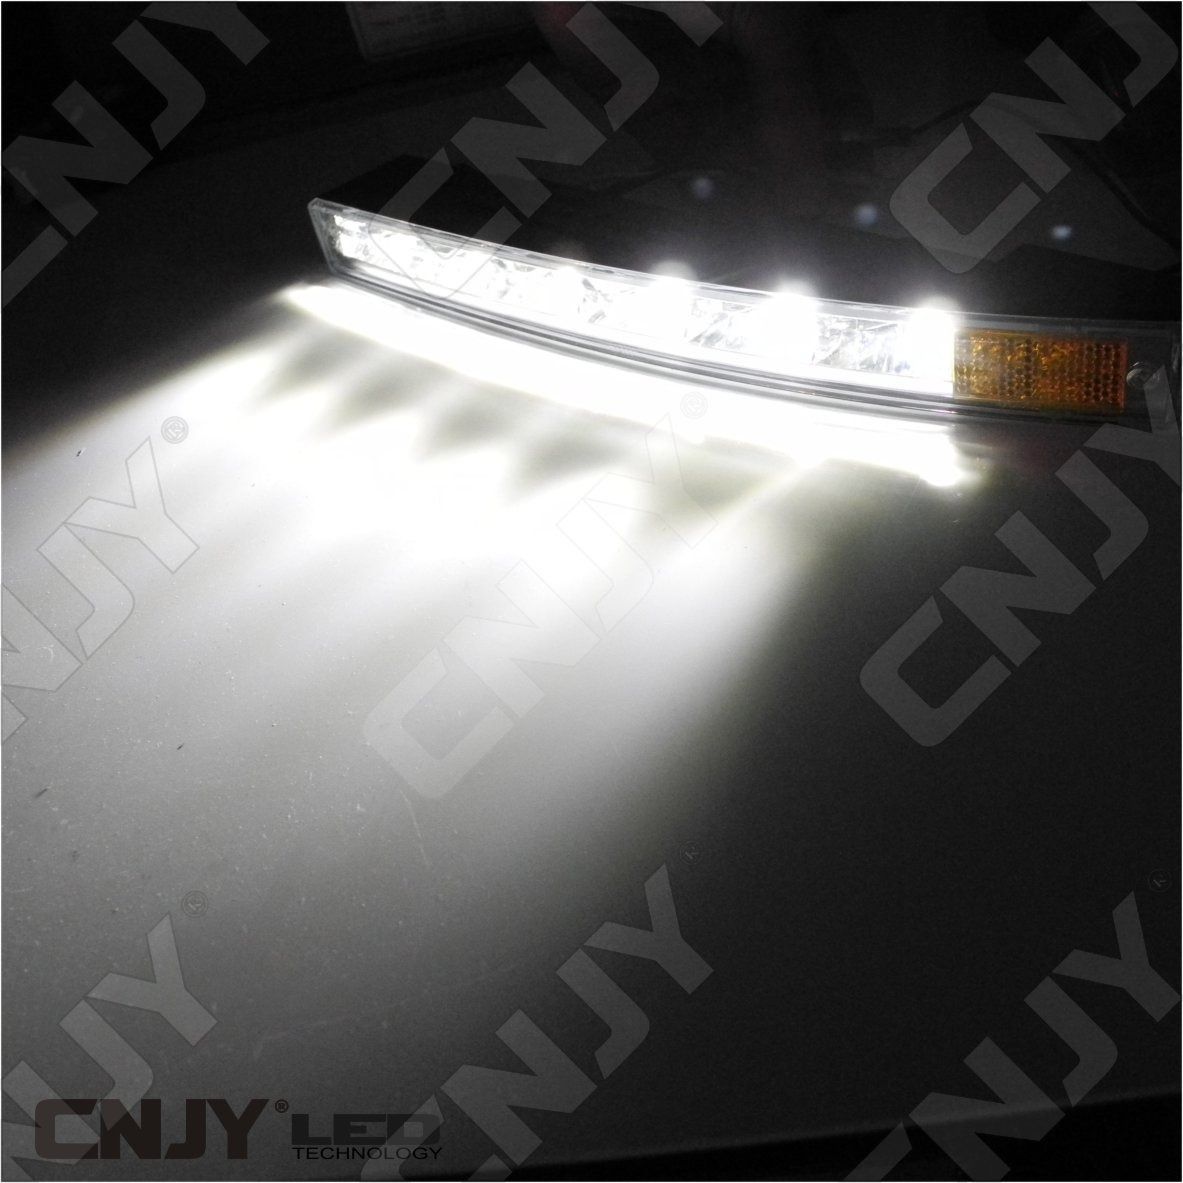 kit,feux,de,jour,diurne,a,led,drl,121,zr1,e4,00rl,12v,24v,dc,universel,auto,camion